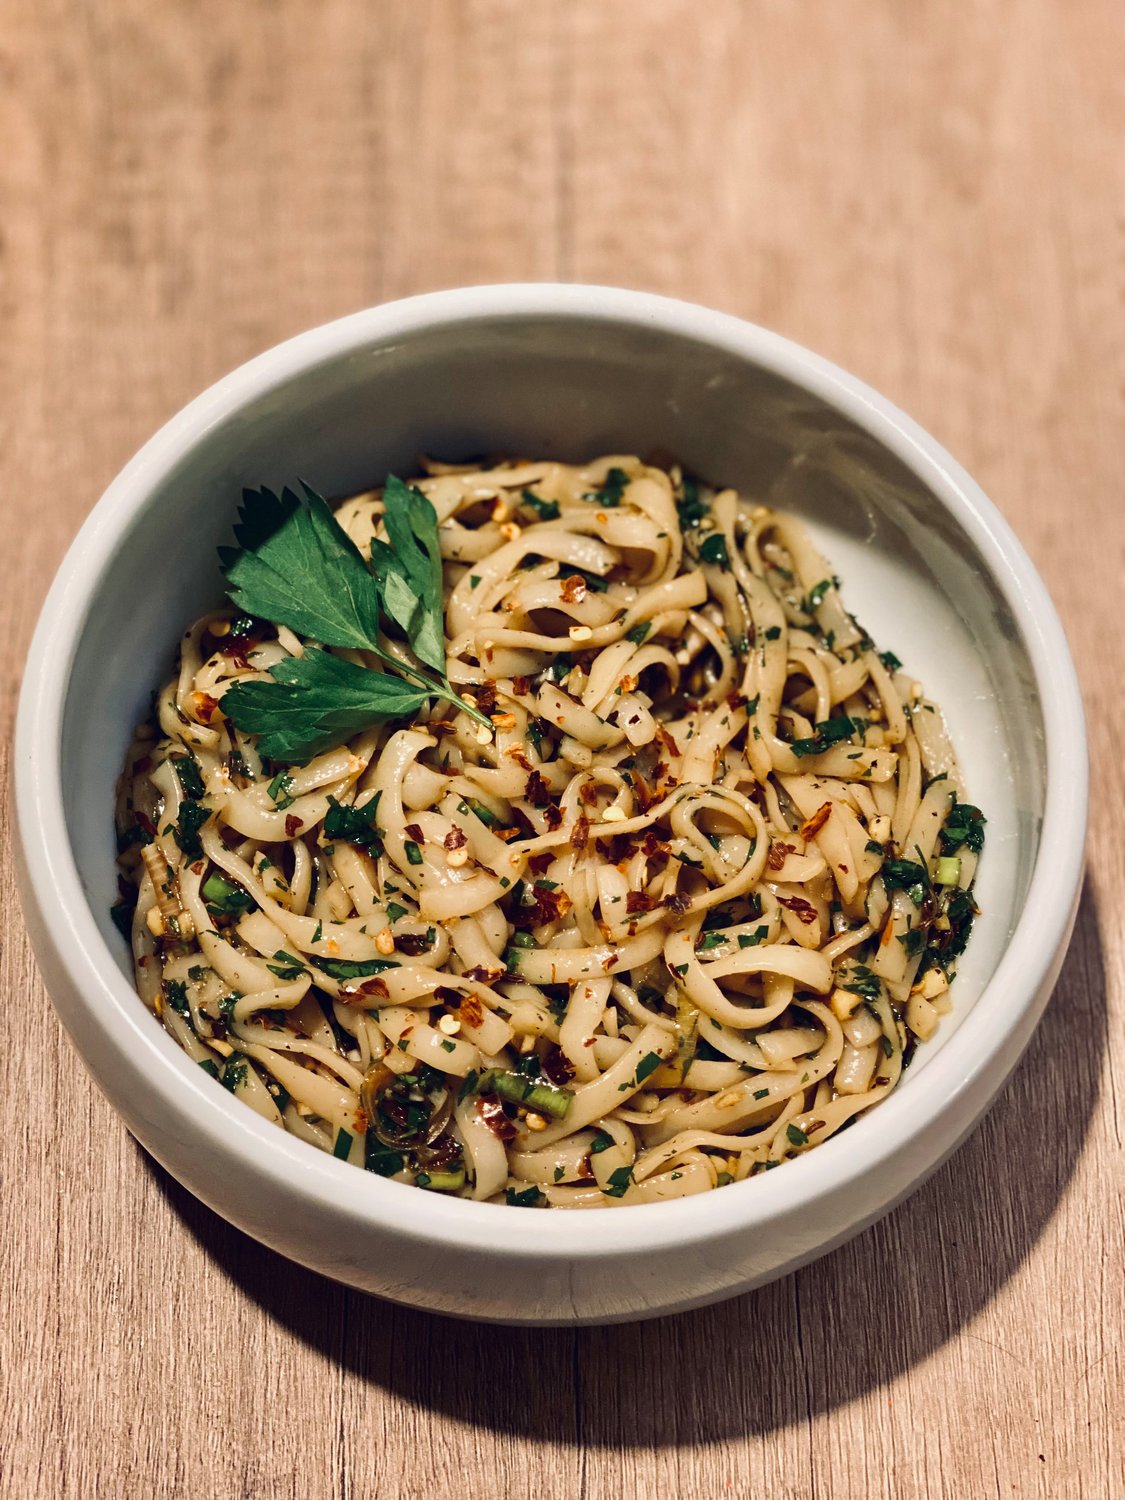 The herbaciousness brings a level of freshness to this dish that takes away the guilt of eating noodles, while also making me forget I’ve had most of these items stored away.